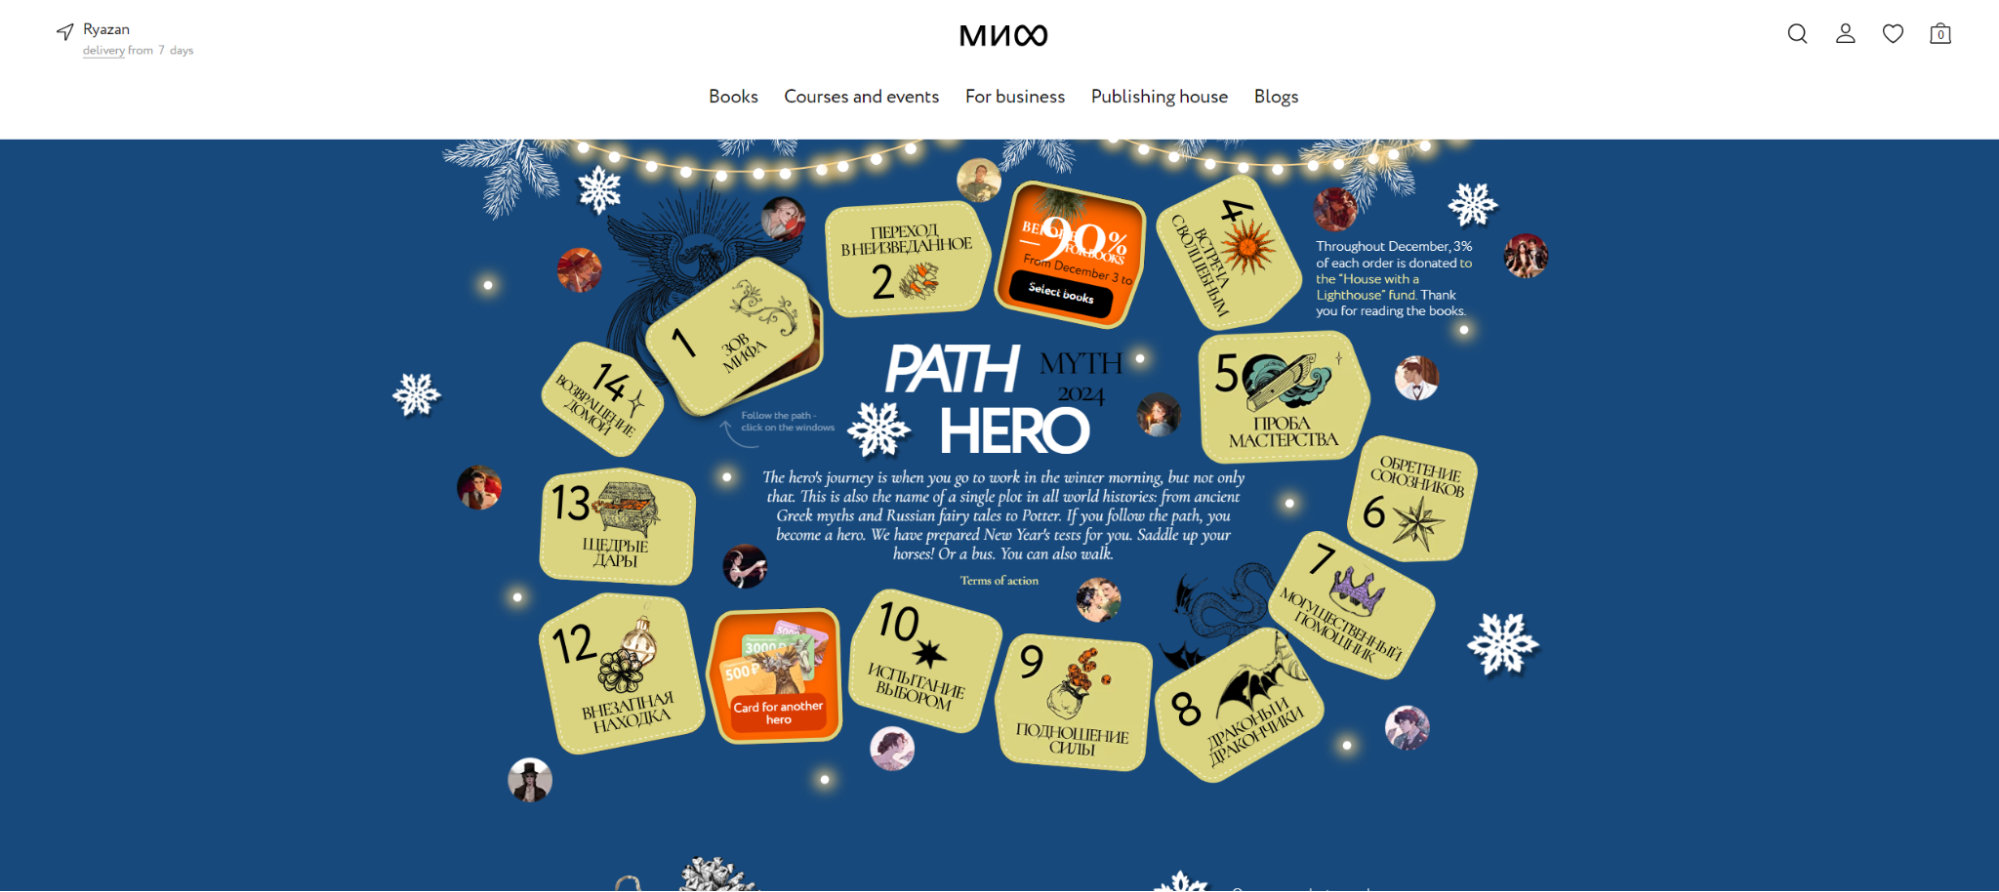 The path of a hero by the “Myth” publishing house 